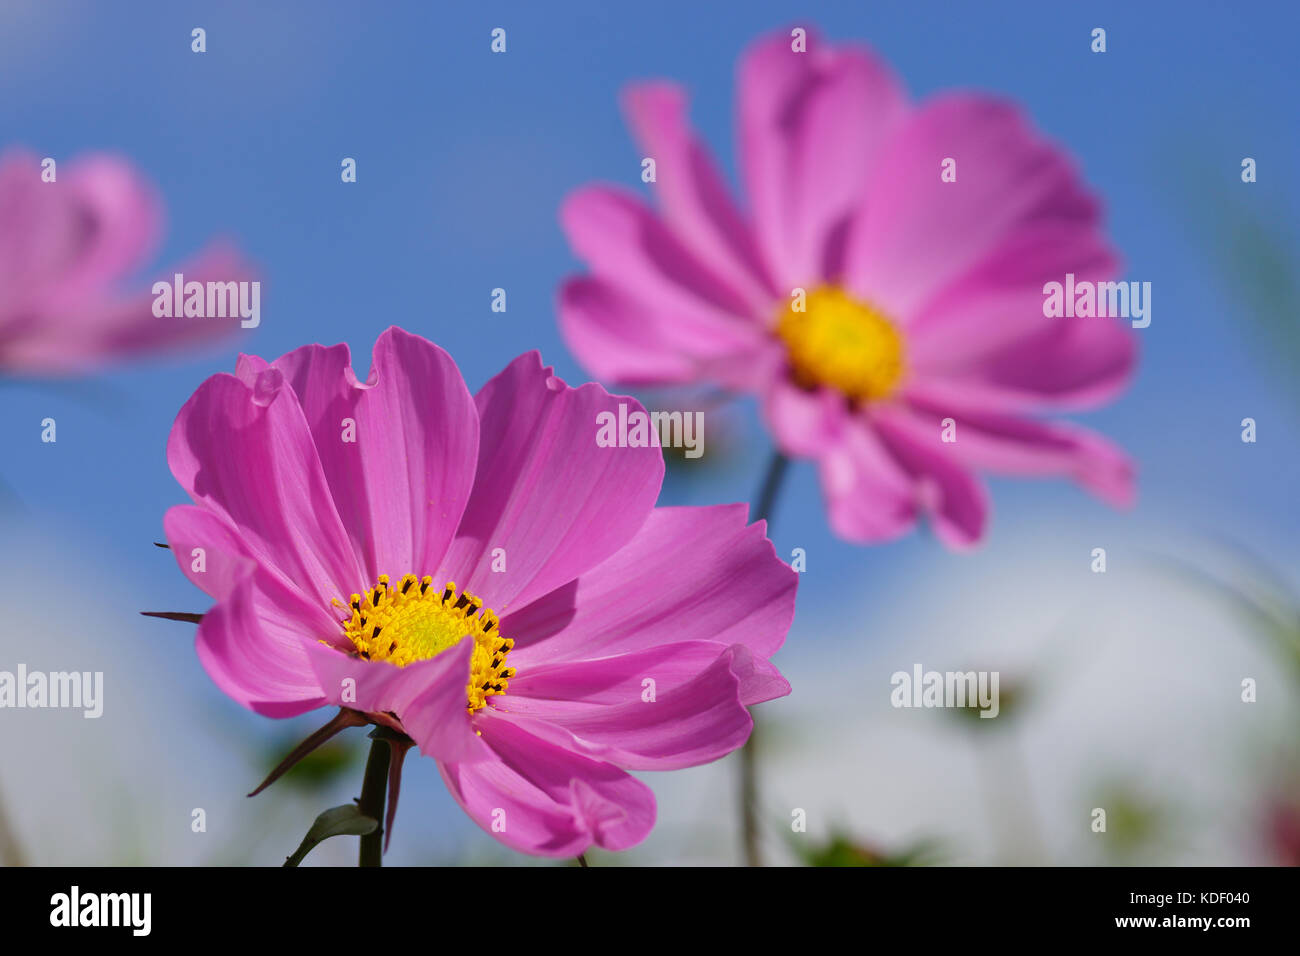 Cosmos flowers against a blue sky Stock Photo